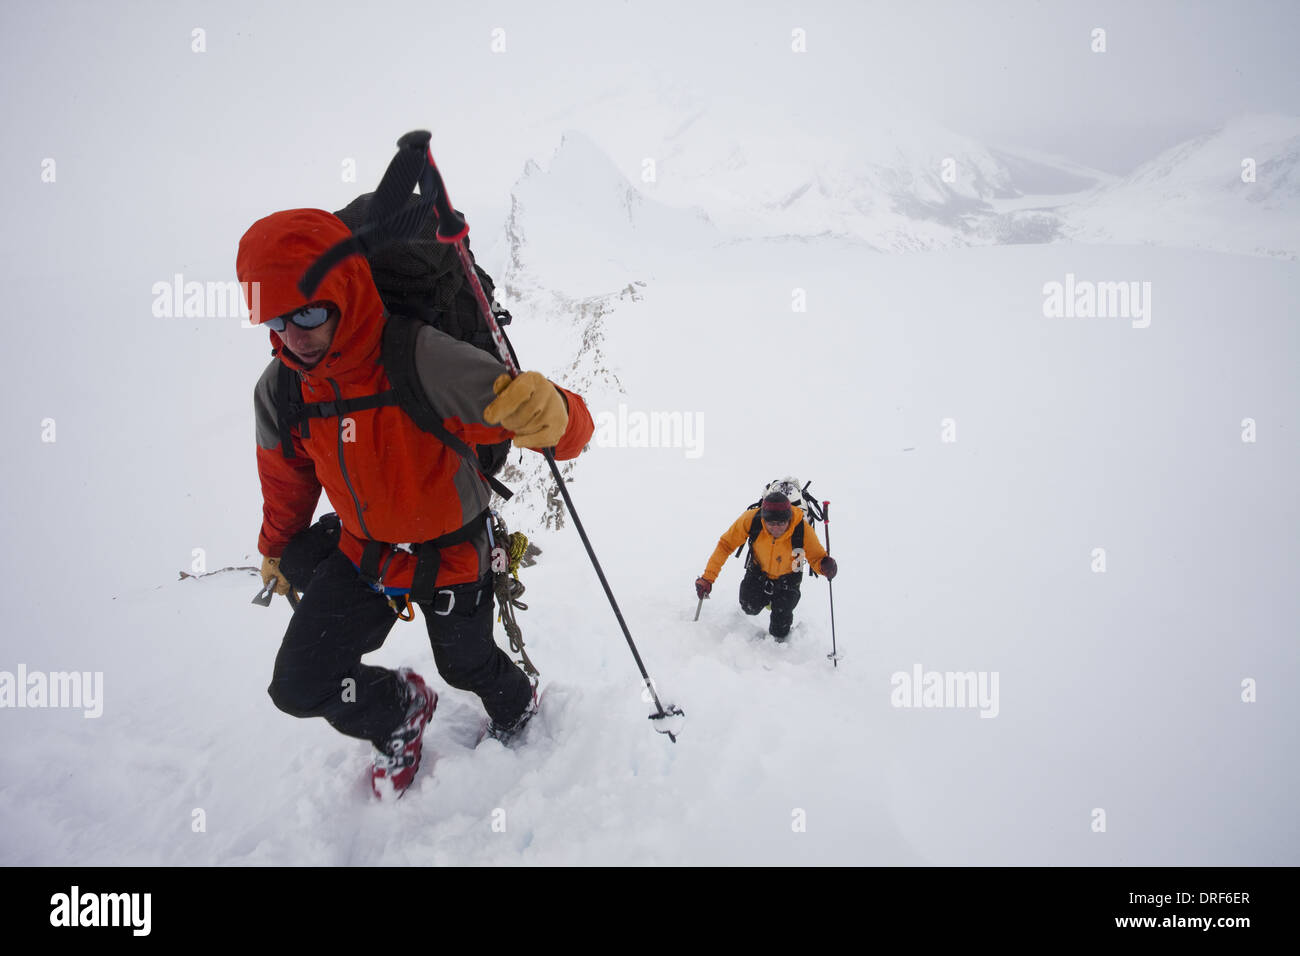 Alberta Canada. Two skiers ascend slope on cloudy snowy day Canada Stock Photo